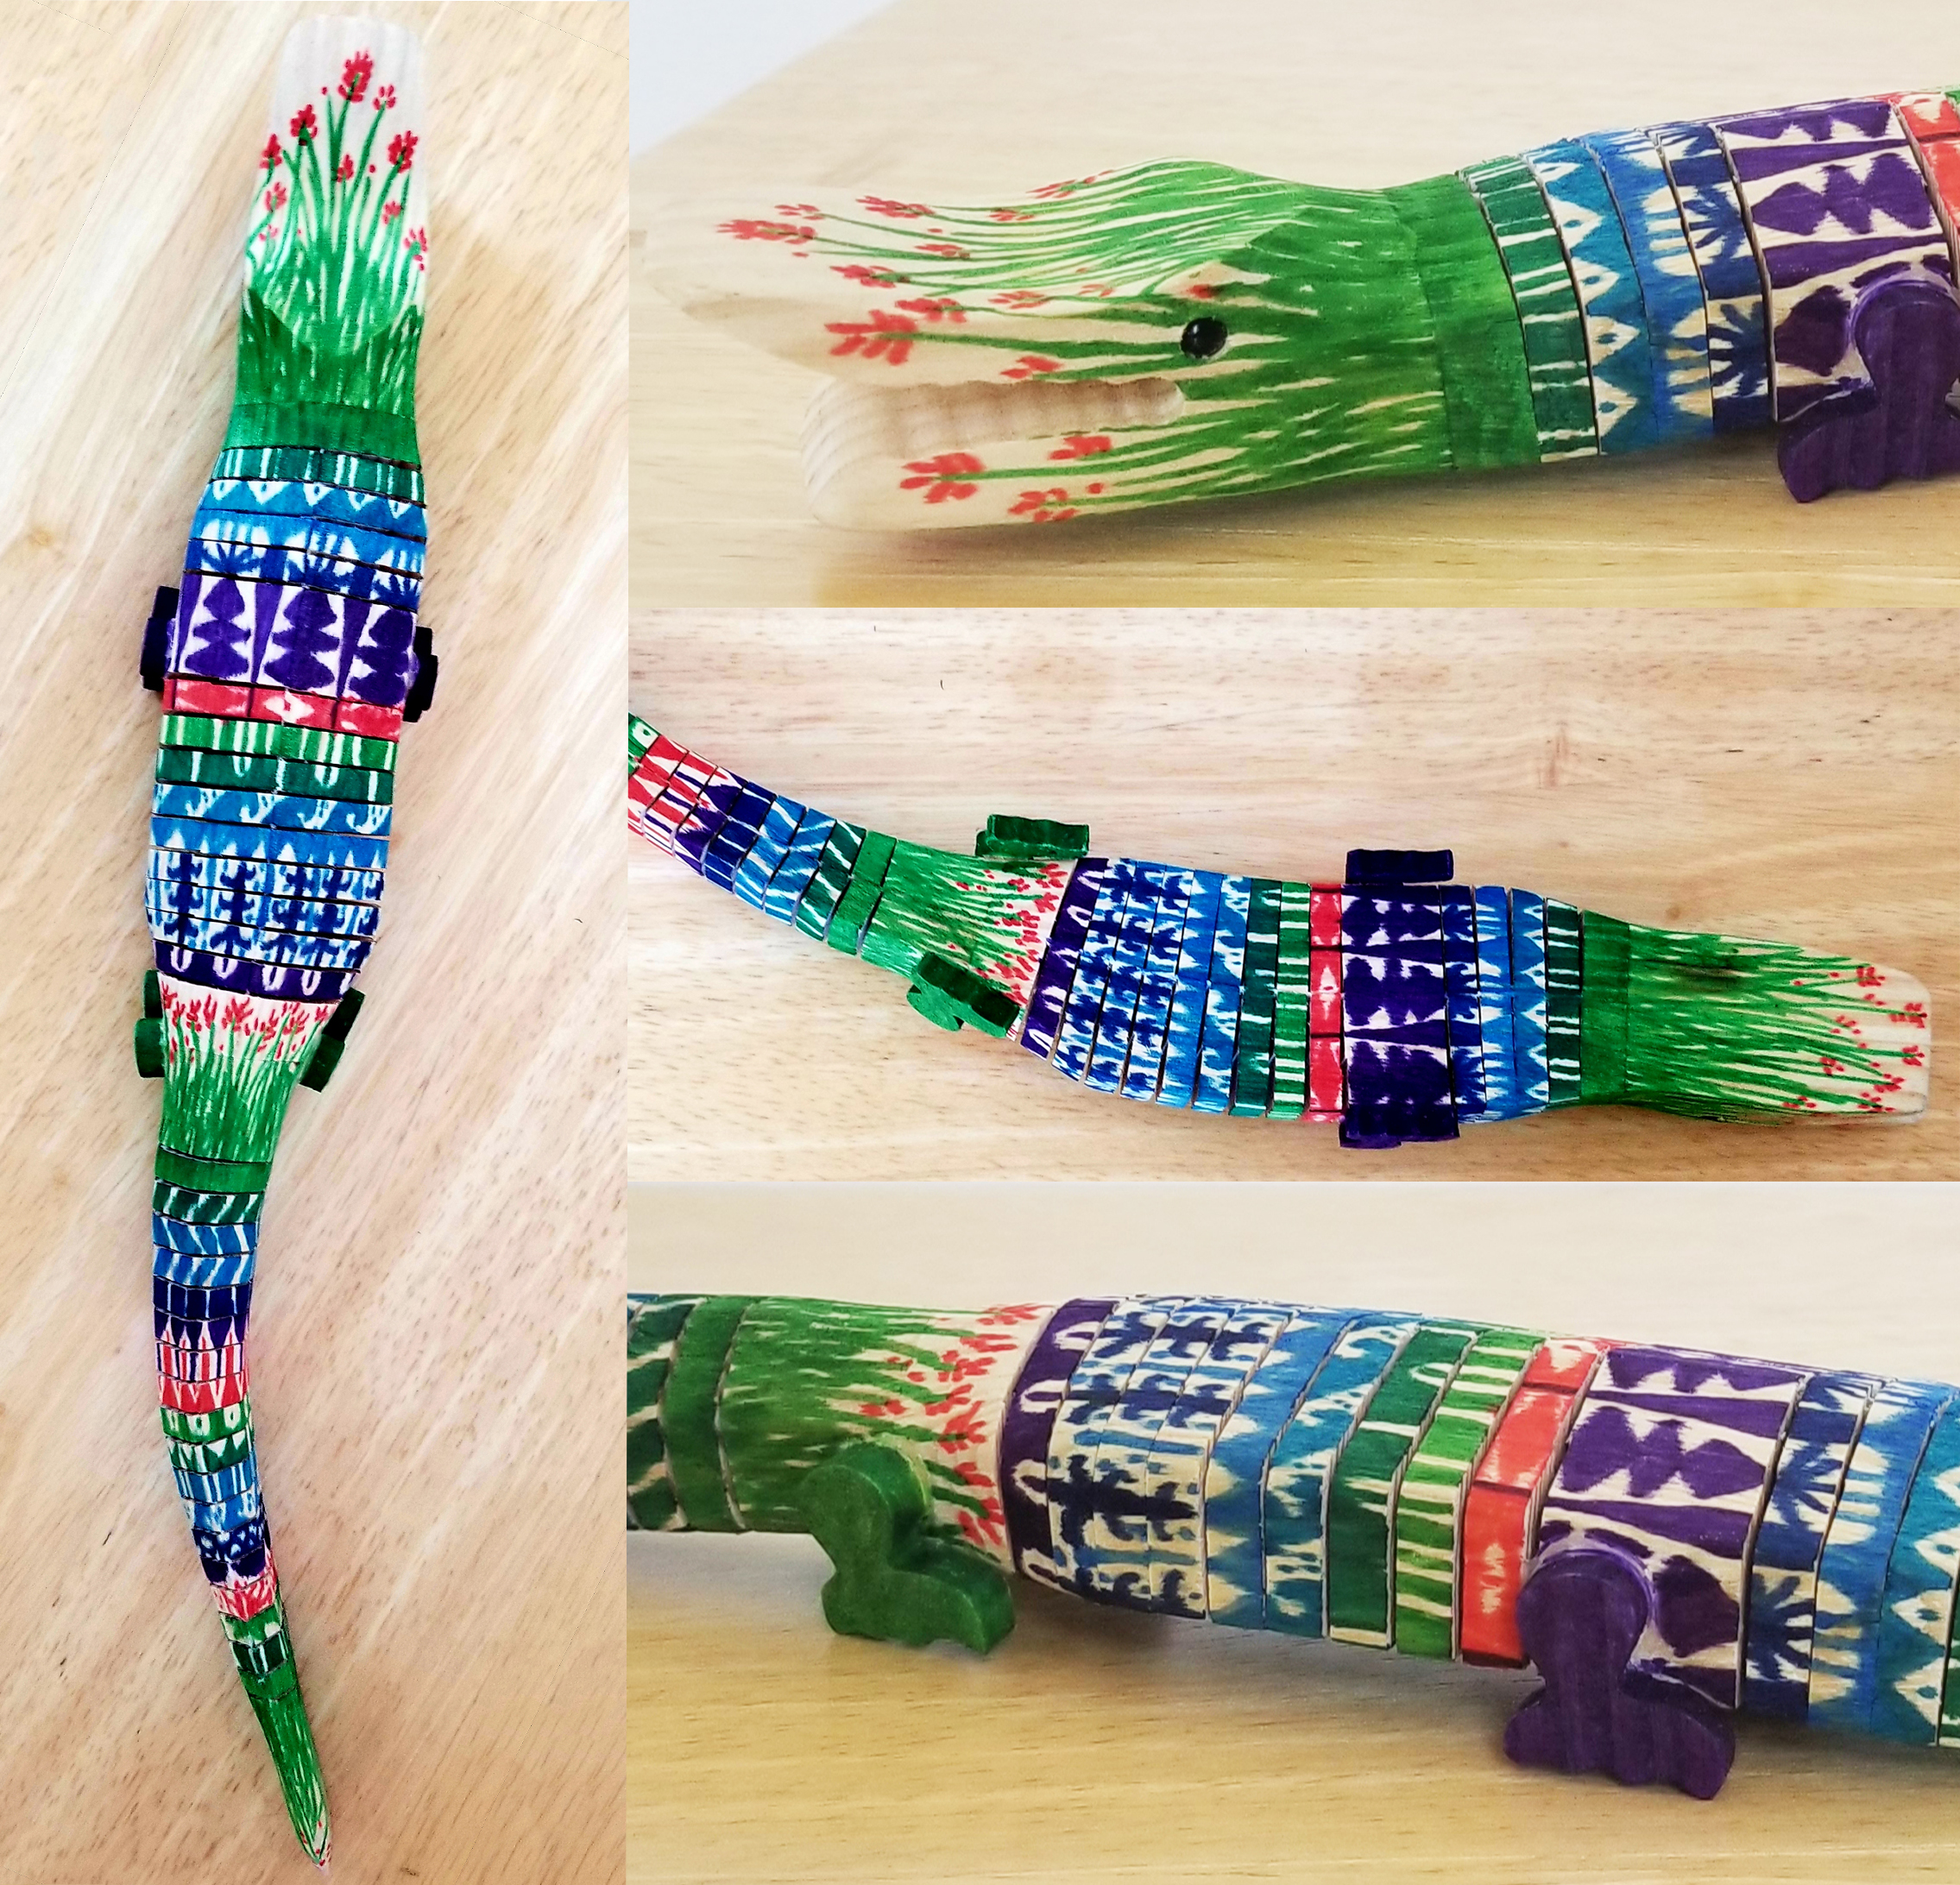 This Colorful Hand Painted Wooden Crocodile - One of a kind - Reticulated is made with love by The Creative Soul Sisters! Shop more unique gift ideas today with Spots Initiatives, the best way to support creators.